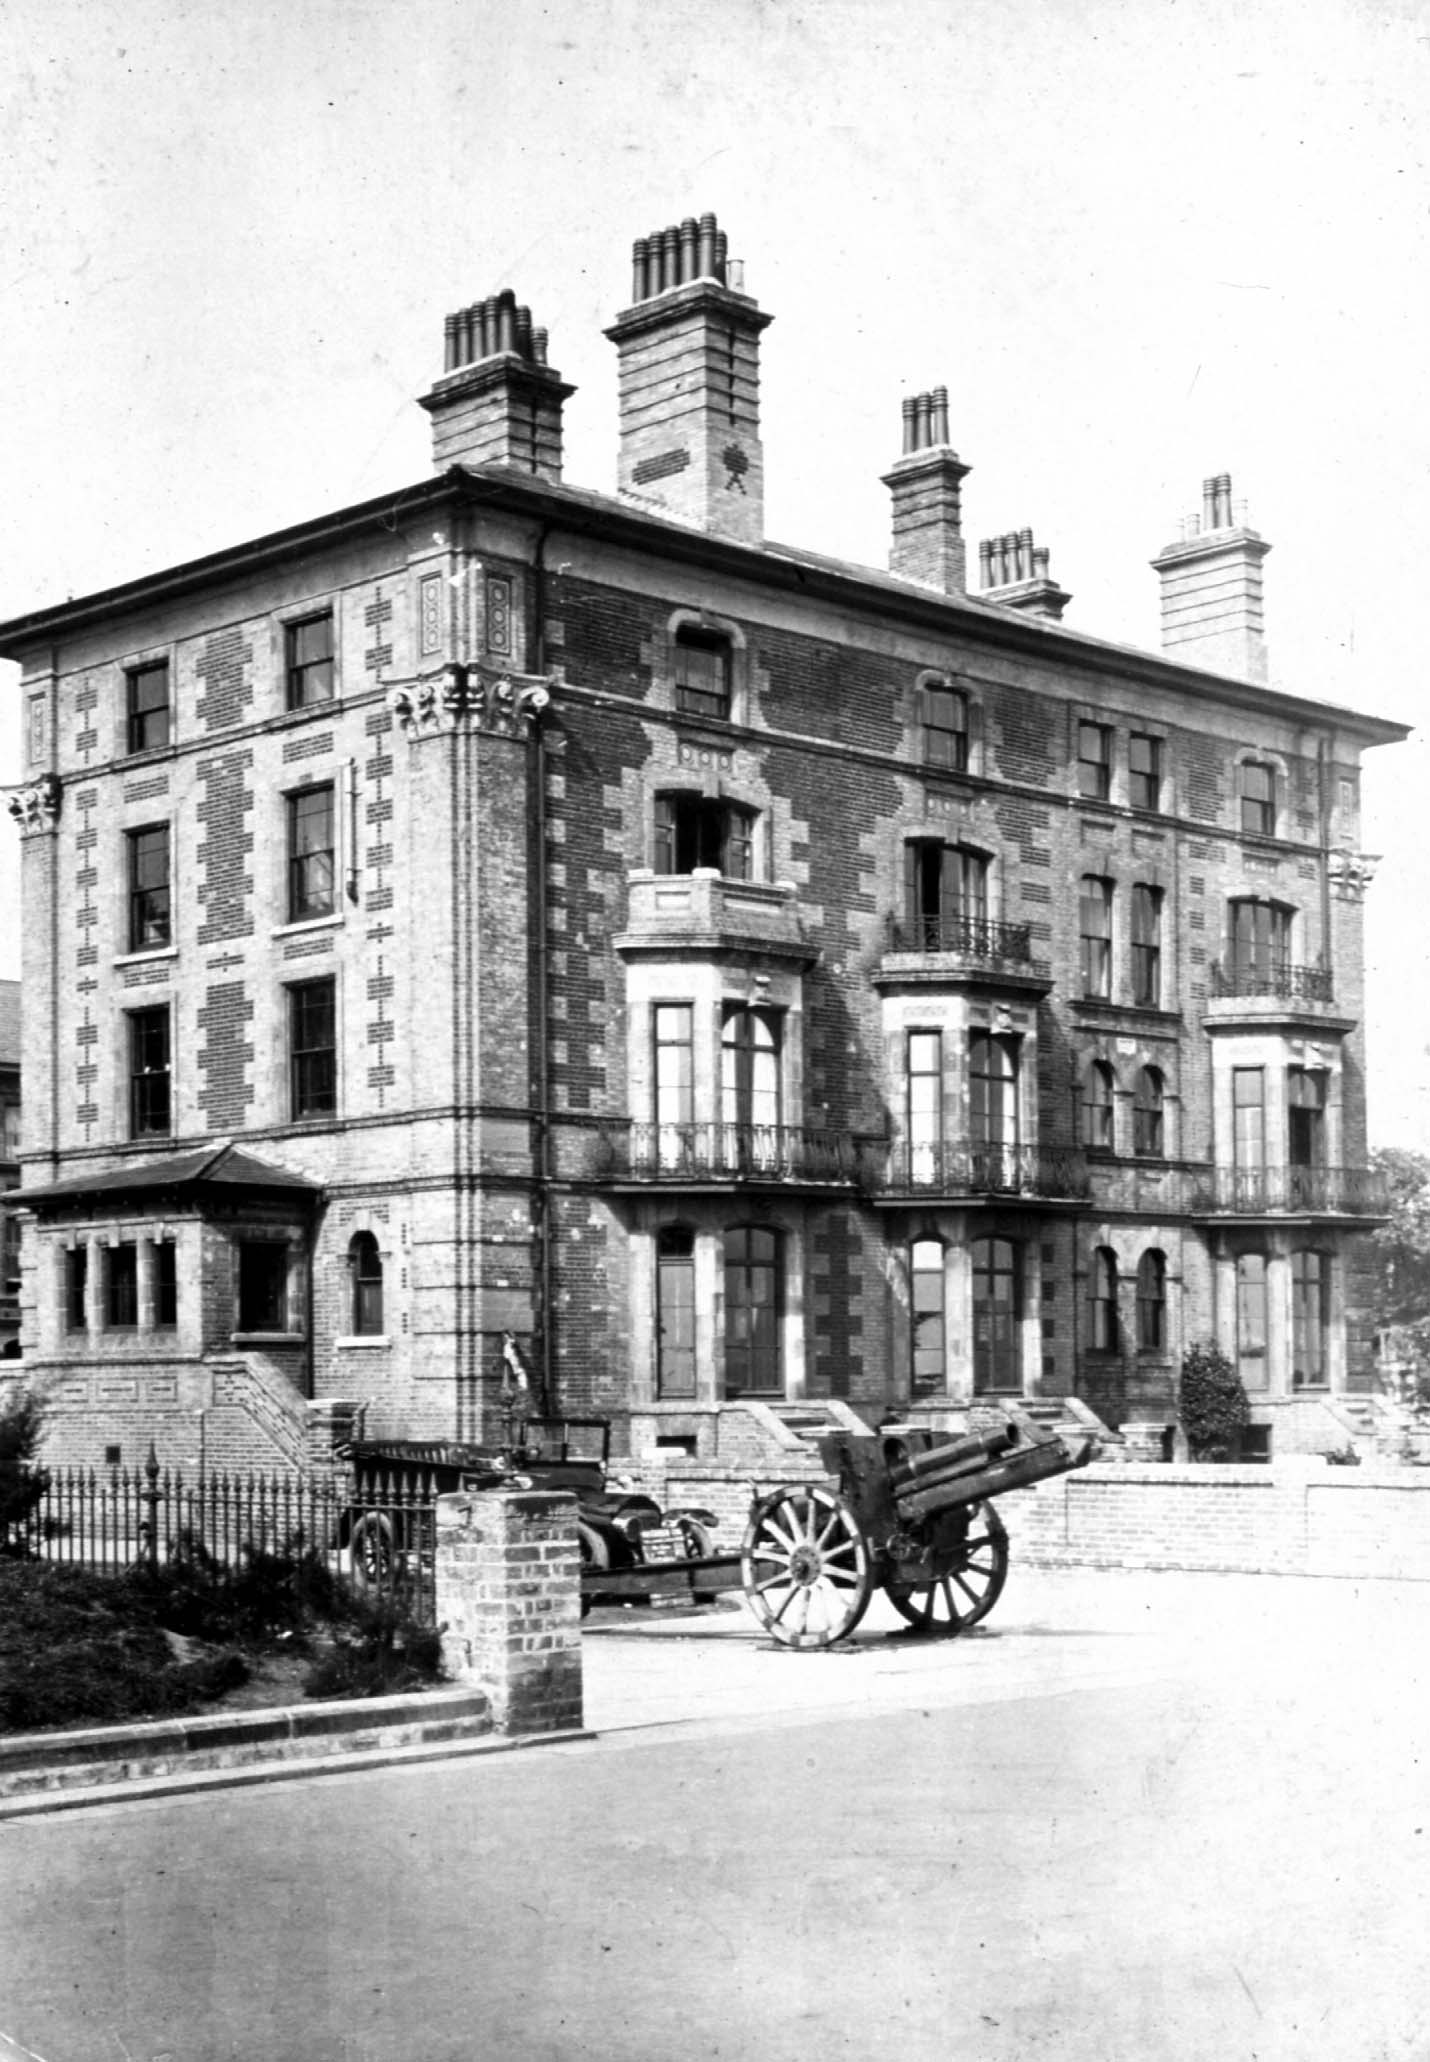 a black and white photograph of a building